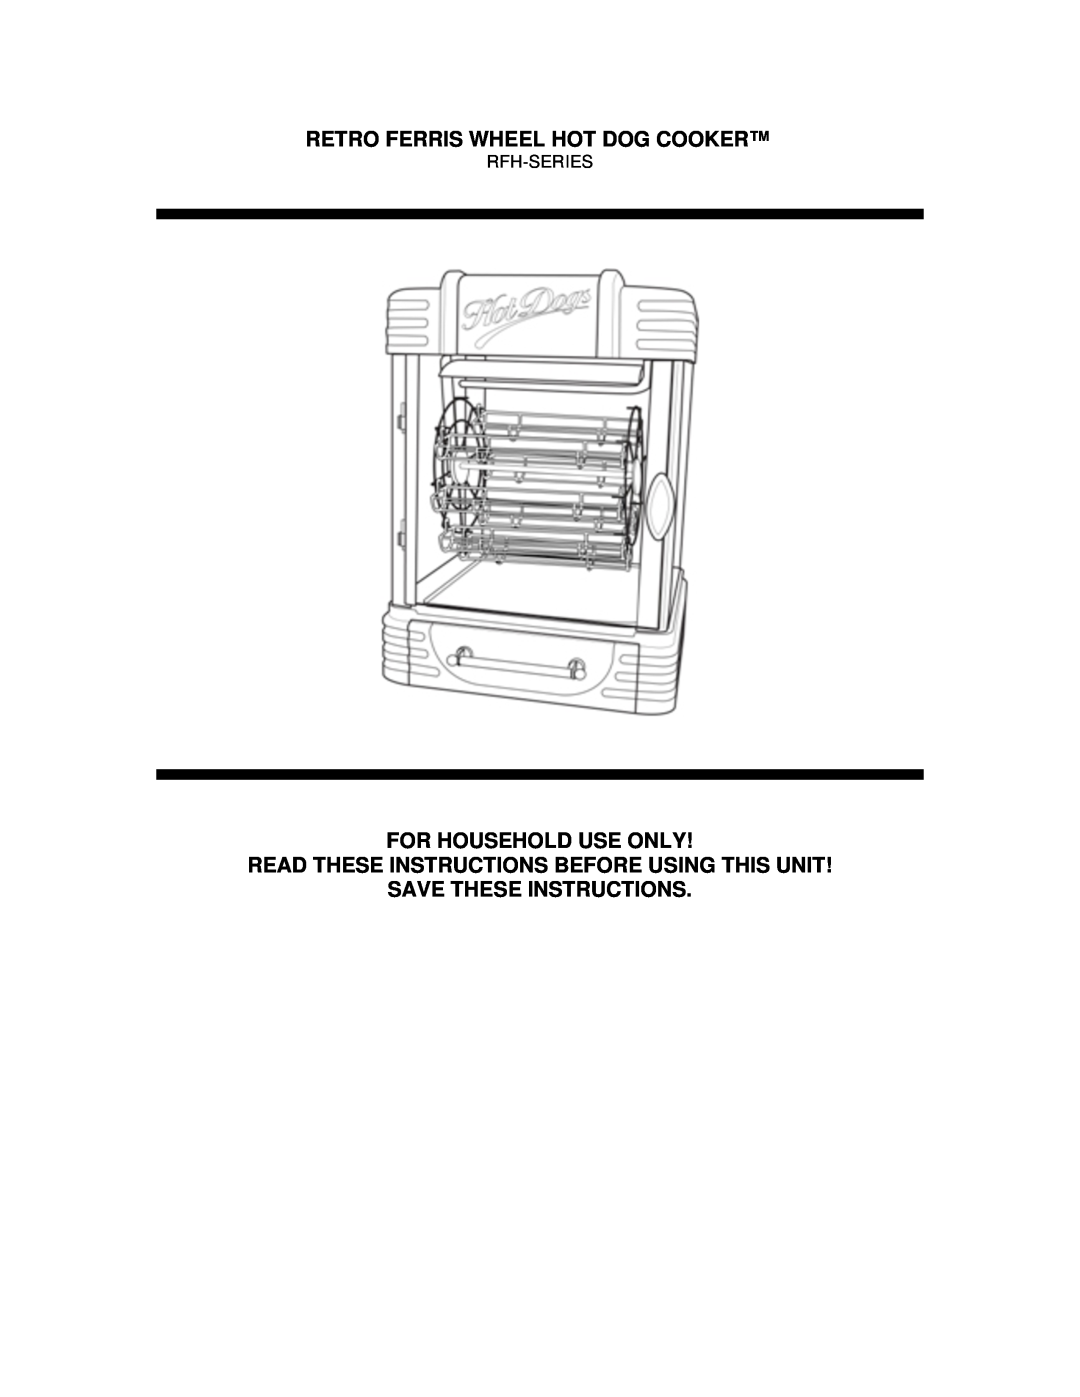 Nostalgia Electrics RFH-900 manual Retro Ferris Wheel Hot Dog Cooker, For Household Use Only, Save These Instructions 